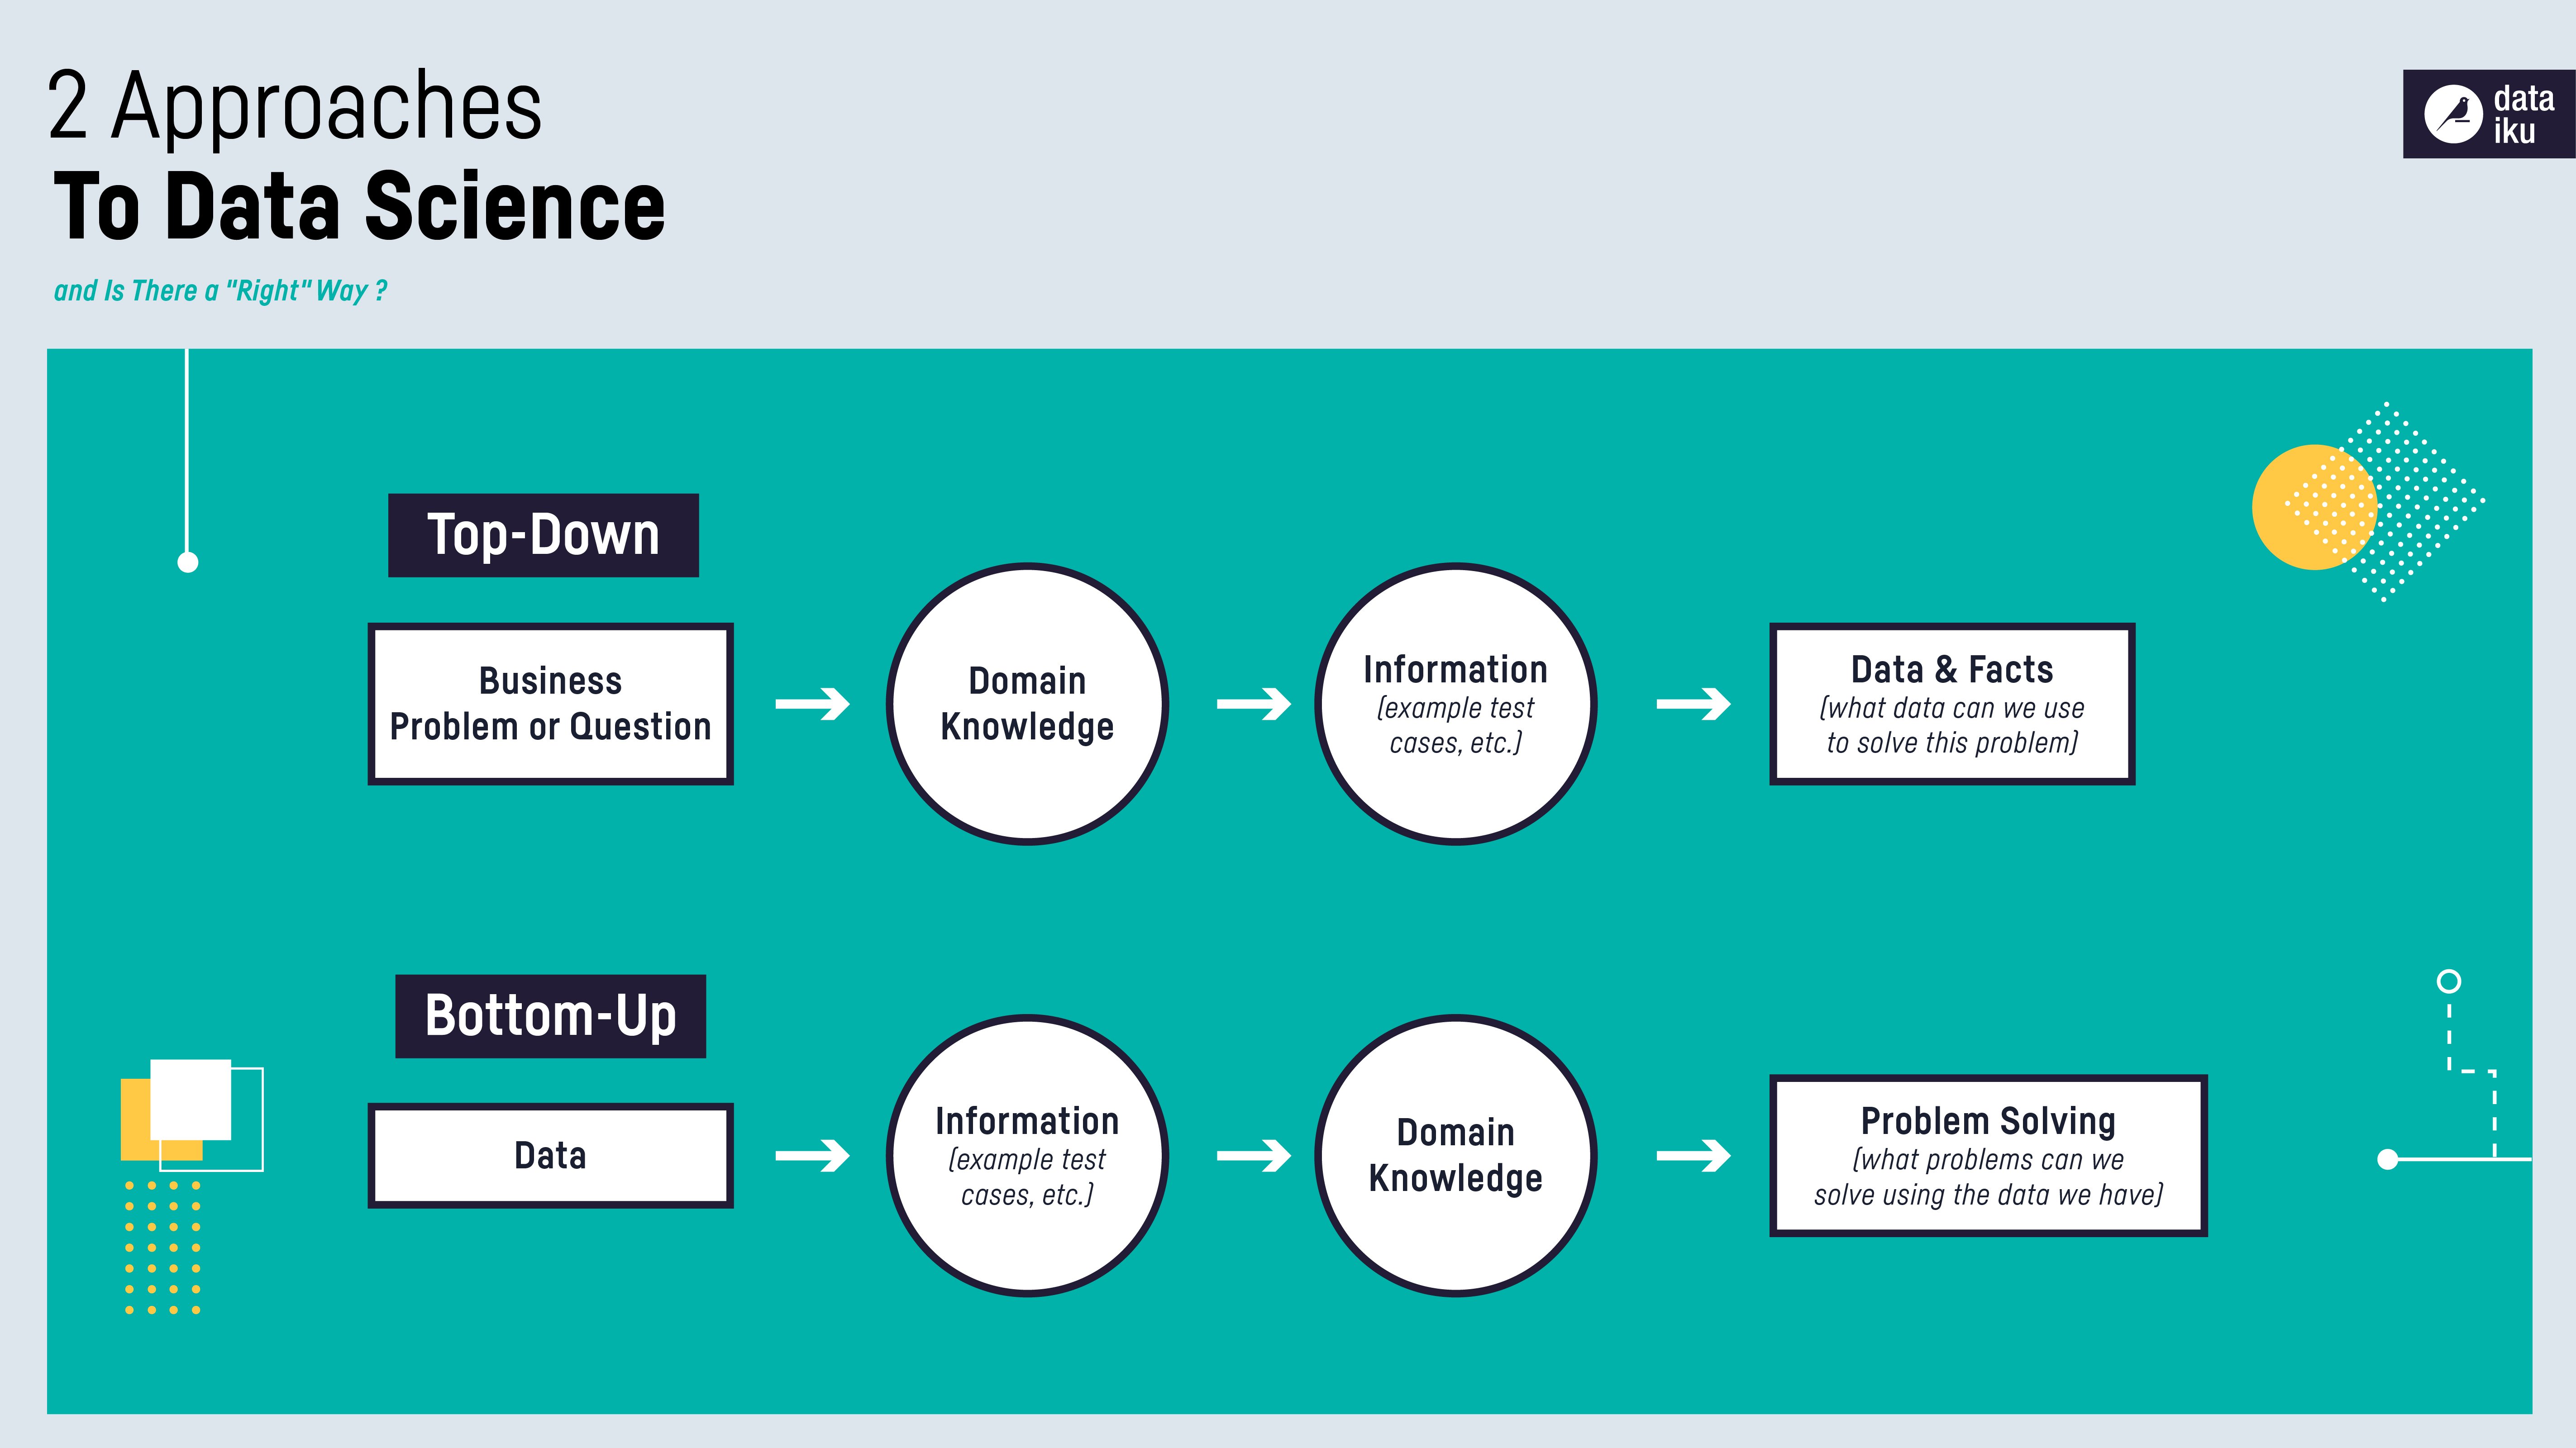 Bottom-Up to Data Science